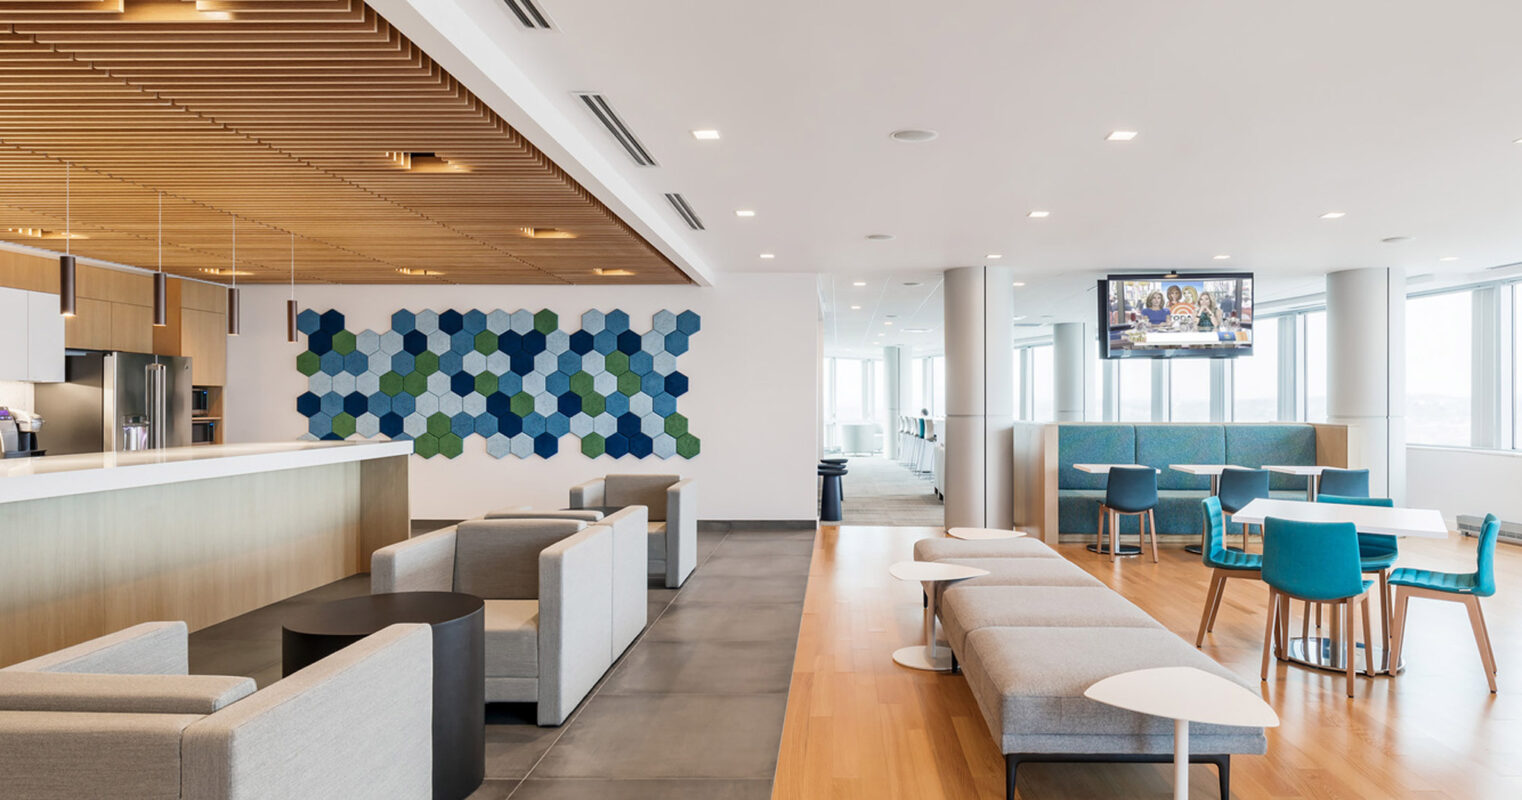 Modern office breakroom featuring natural light, sleek white surfaces, wooden slats ceiling detail, and pops of color from blue upholstered furniture and hexagonal wall art.